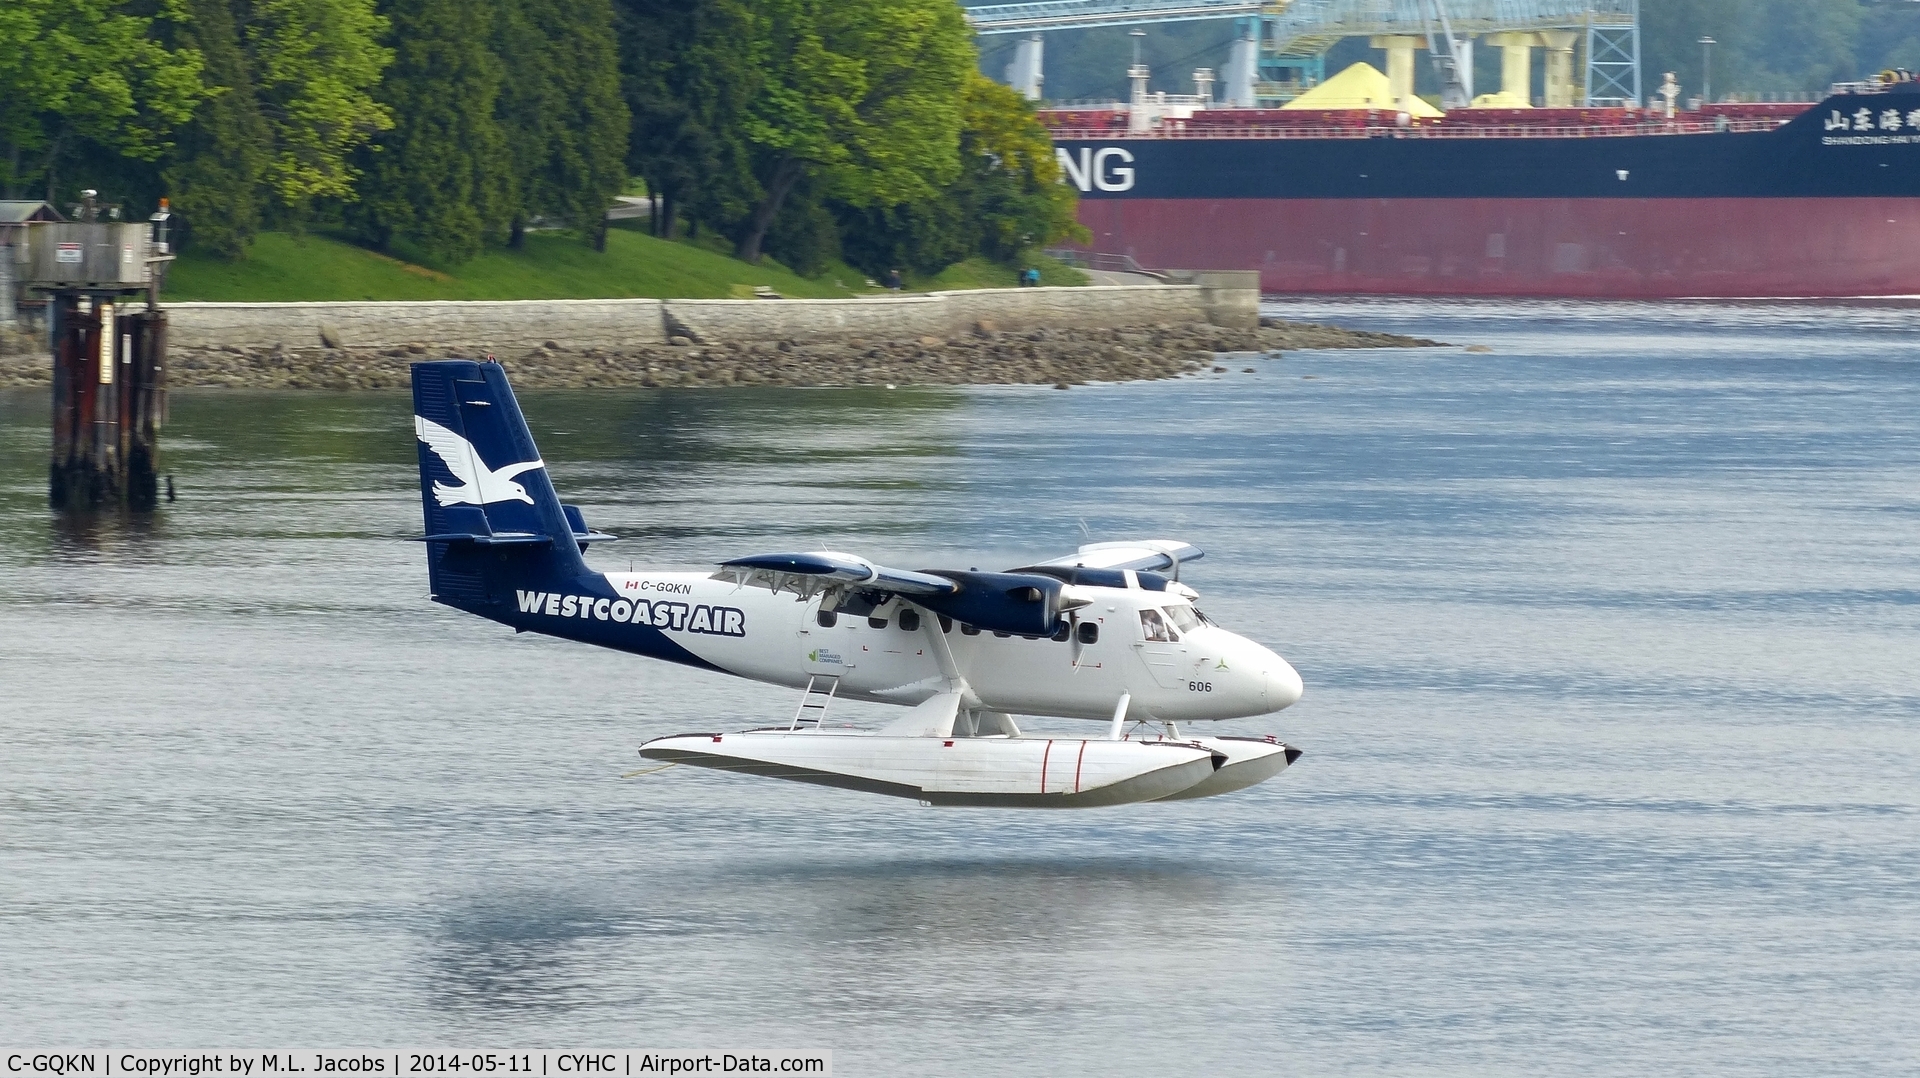 C-GQKN, 1968 De Havilland Canada DHC-6-100 Twin Otter C/N 94, Westcoast Air #606 landing in Coal Harbour after a straight-in approach over Stanley Park.